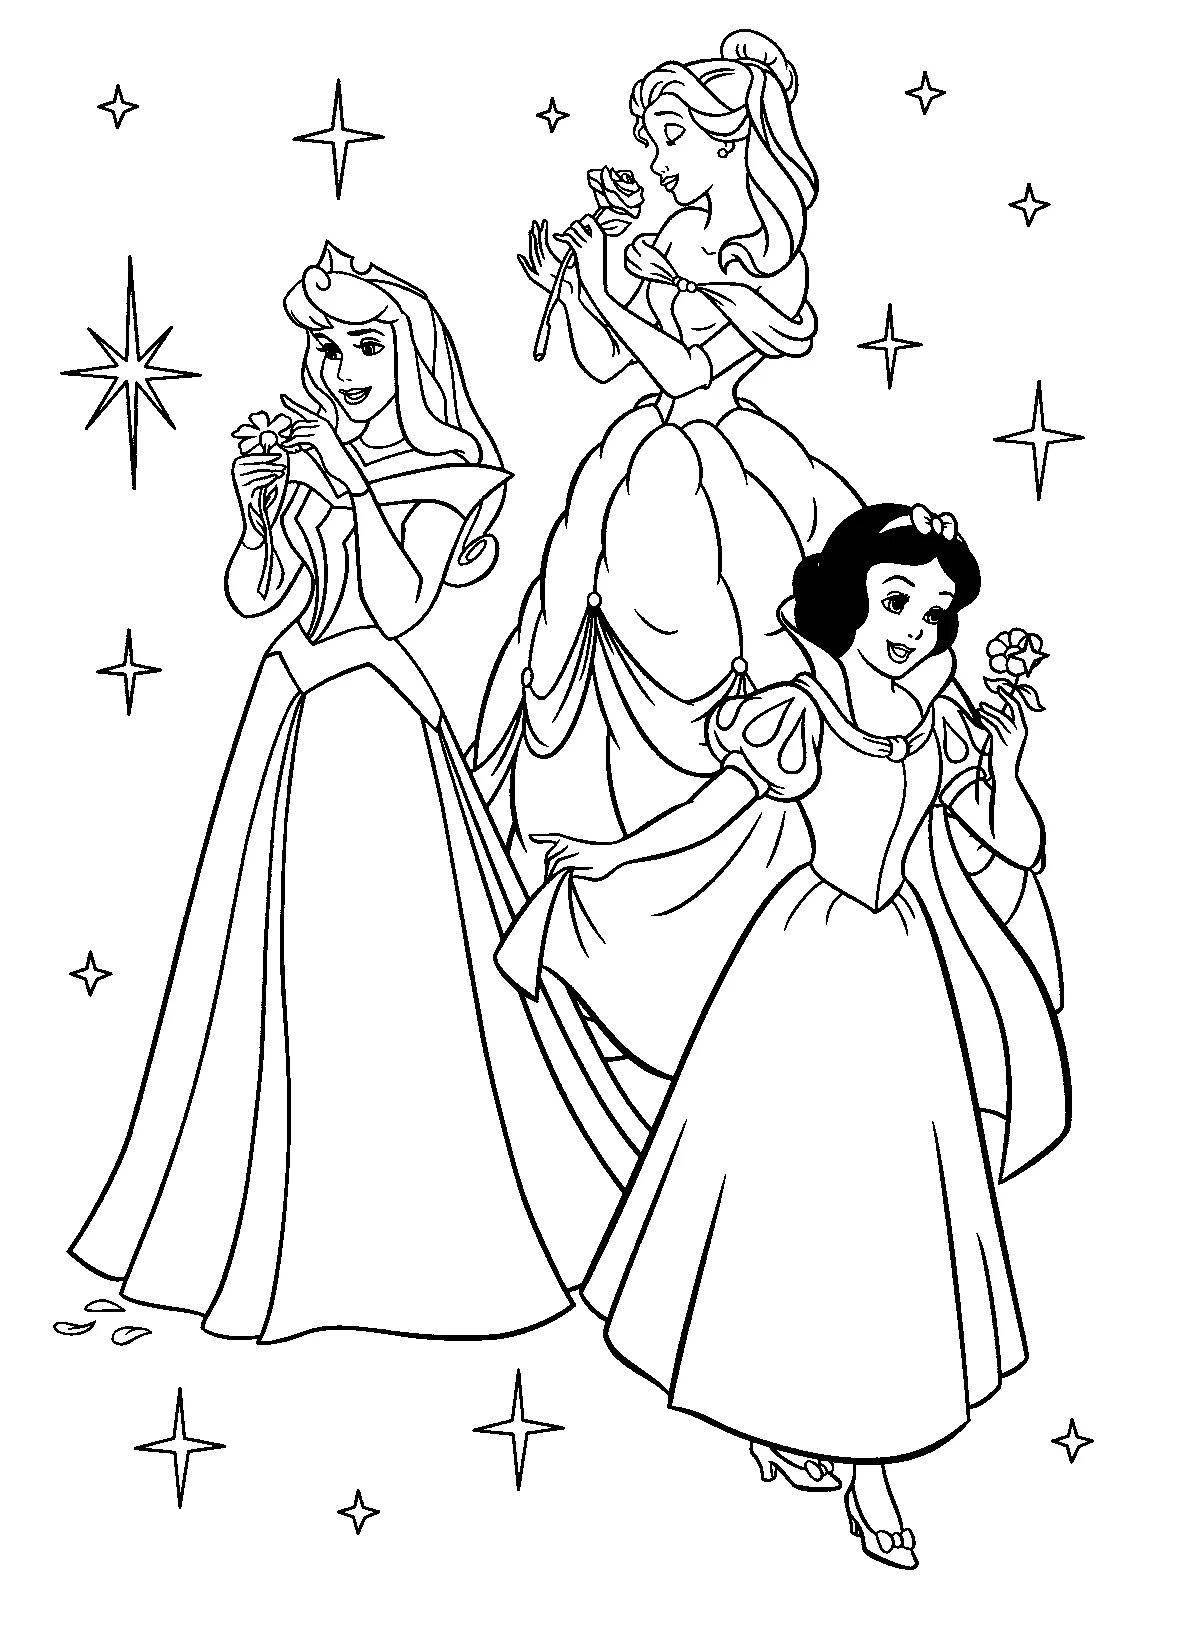 Dazzling princess coloring pages